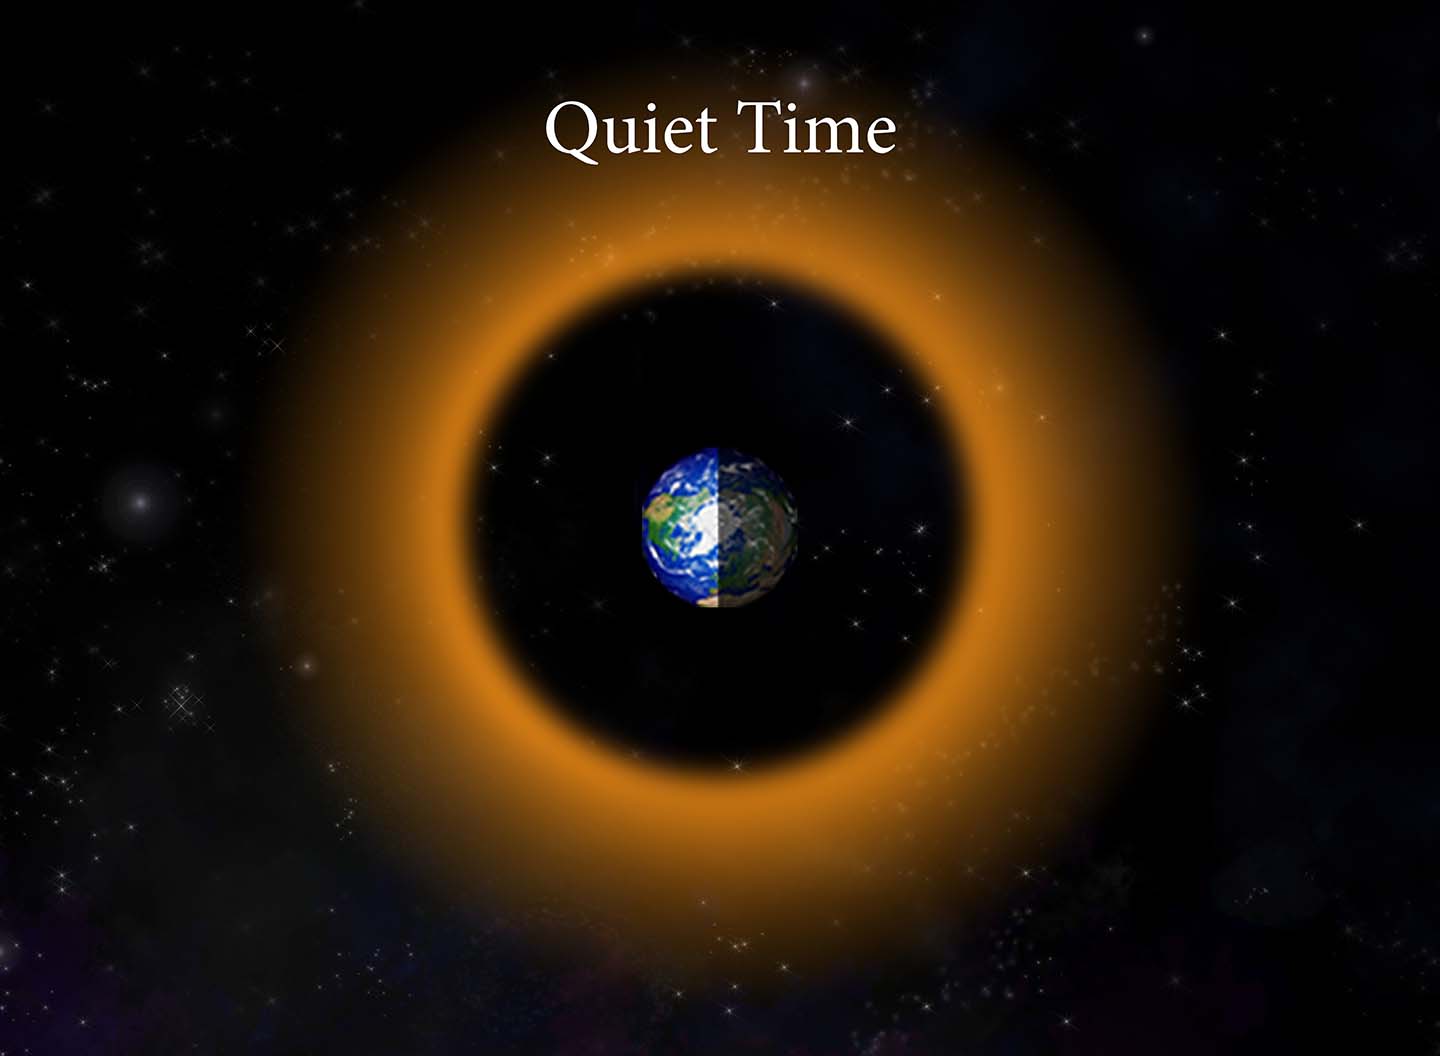 "Ring current" around Earth